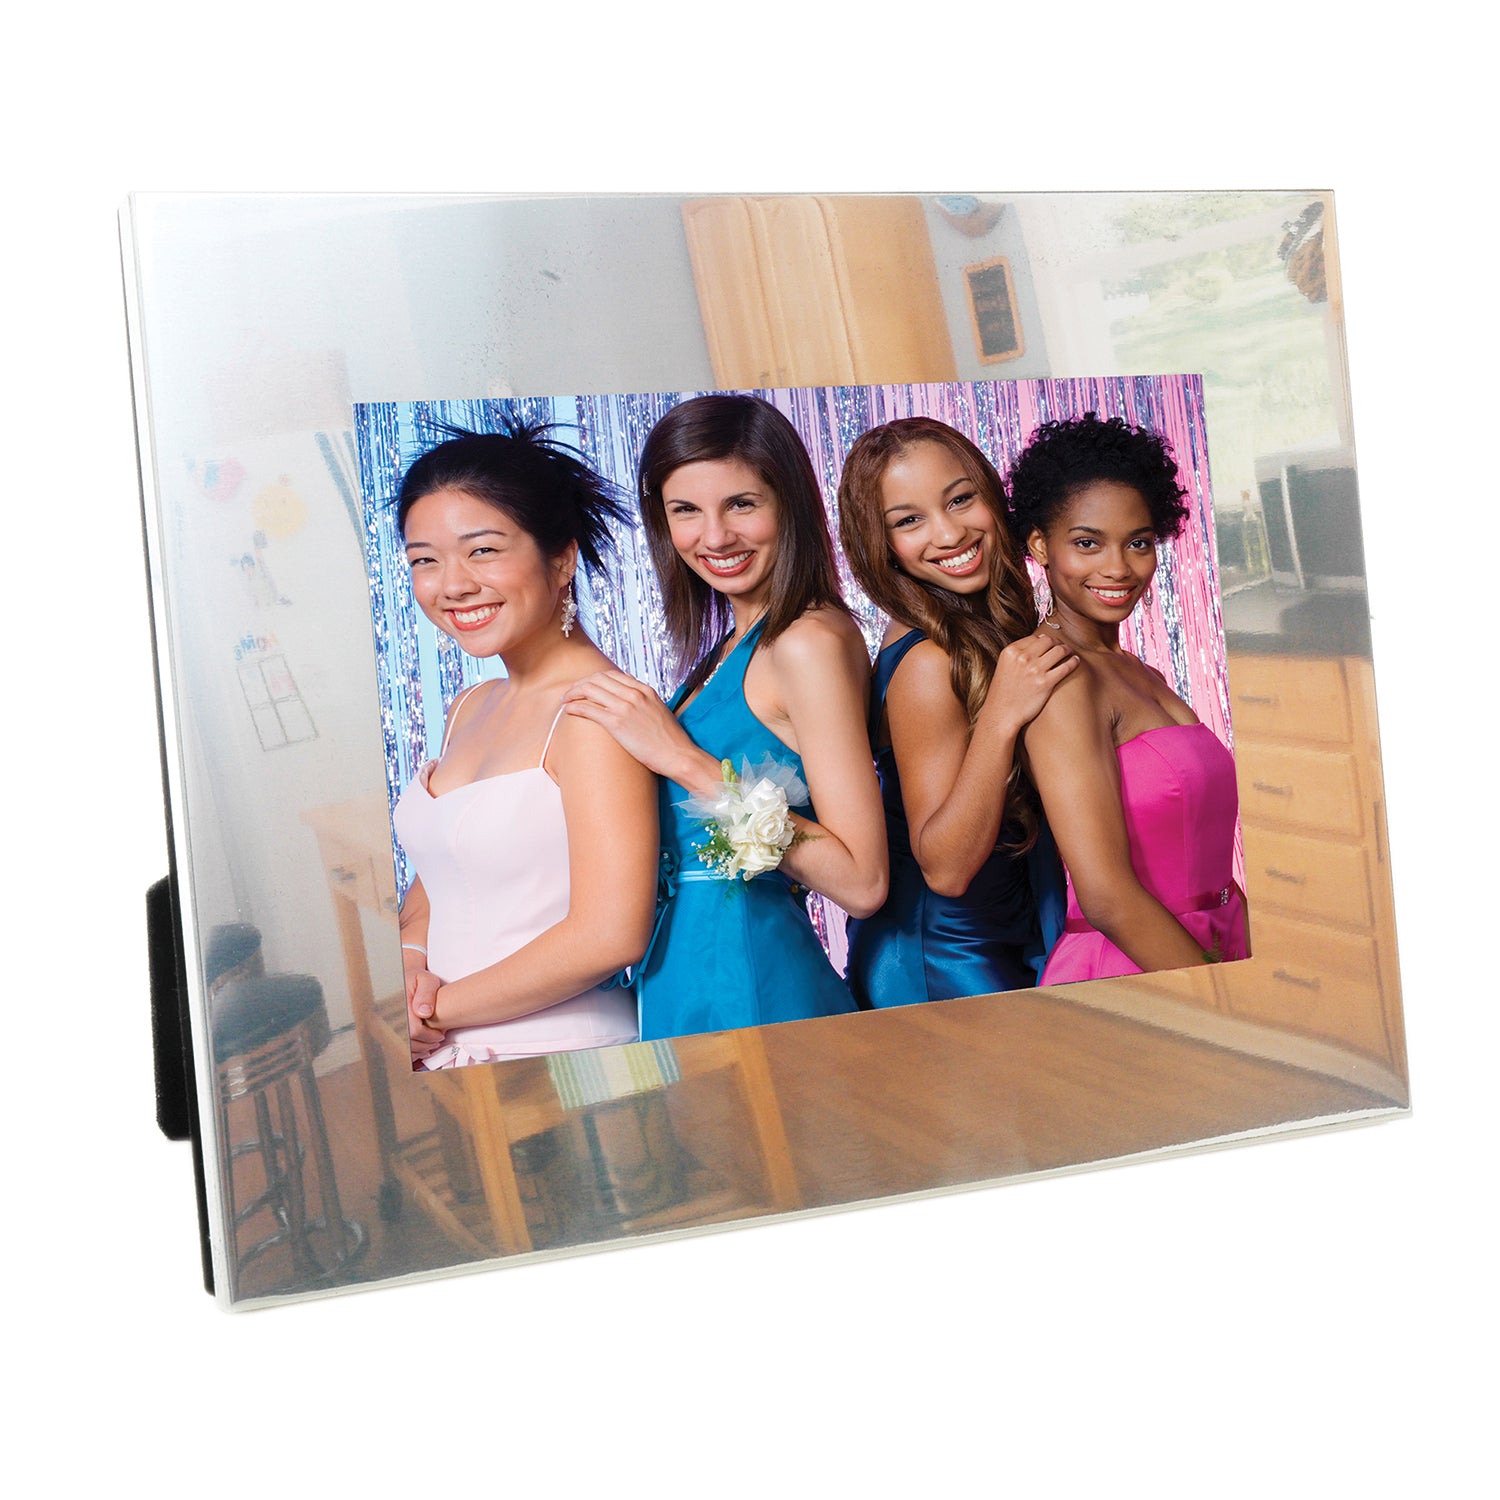 4" x 6" Mirror Finish Picture Frames